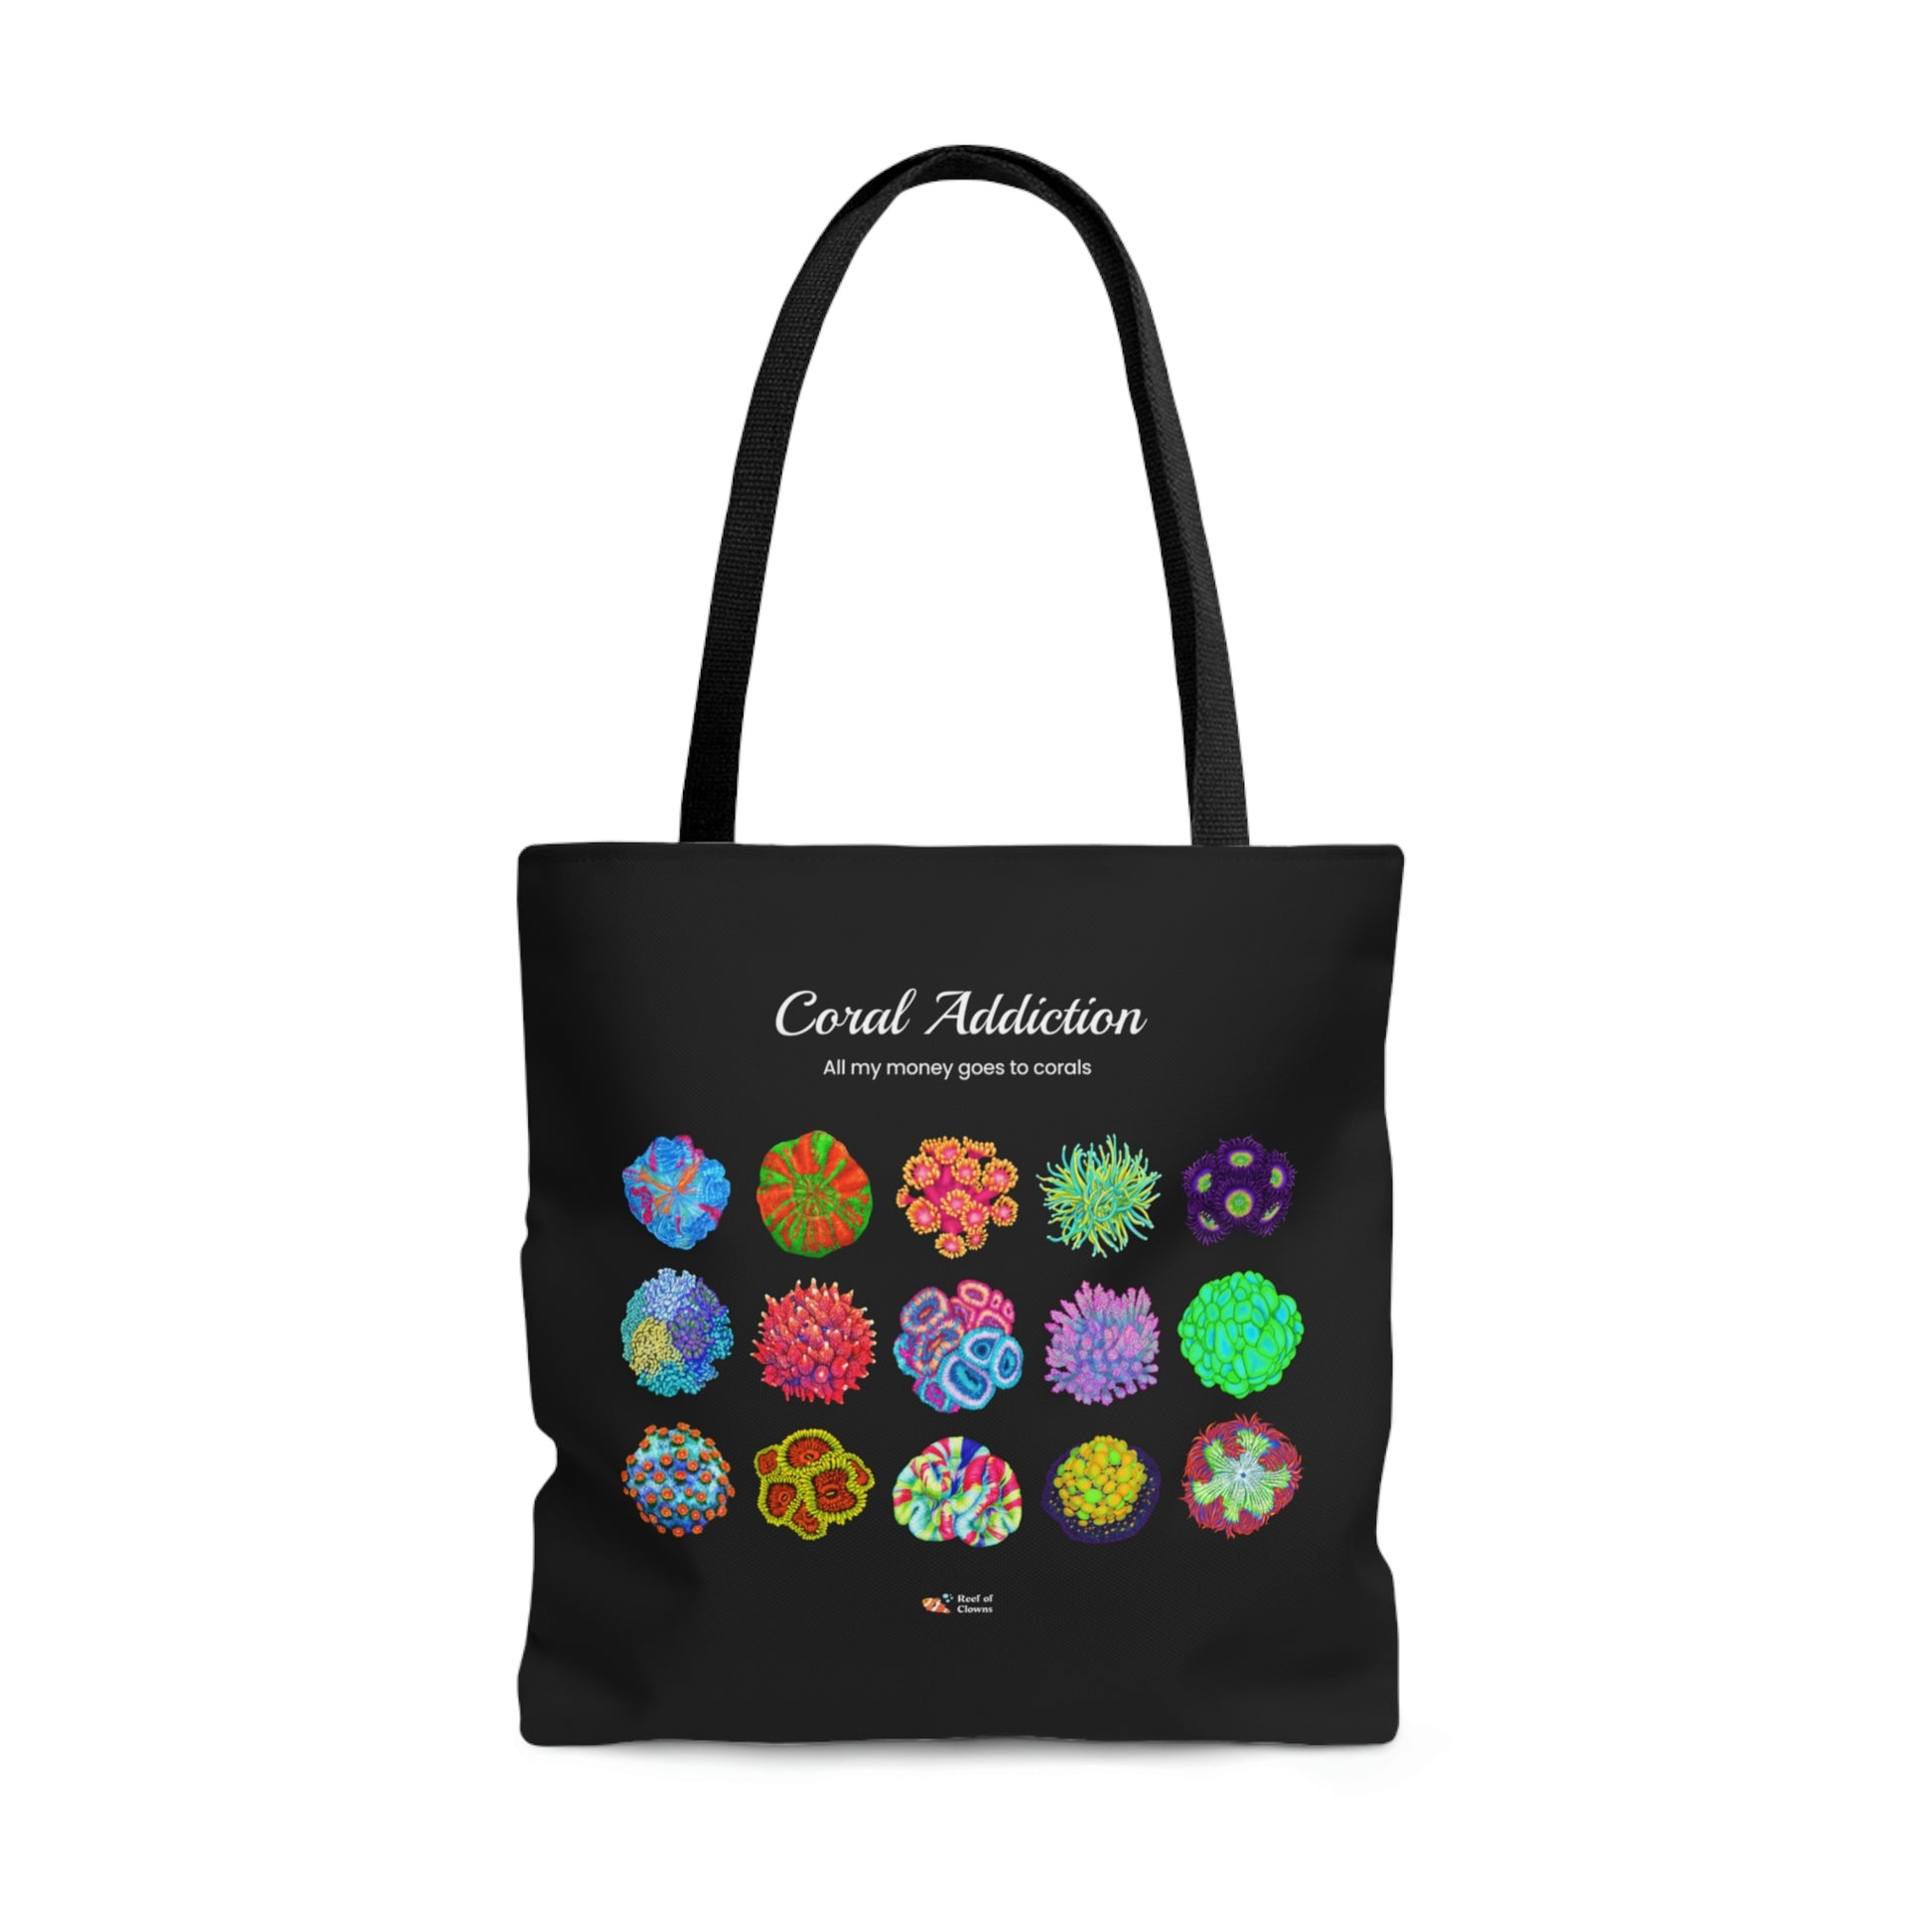 Coral & Saltwater Fish Addiction Bag - Reef of Clowns